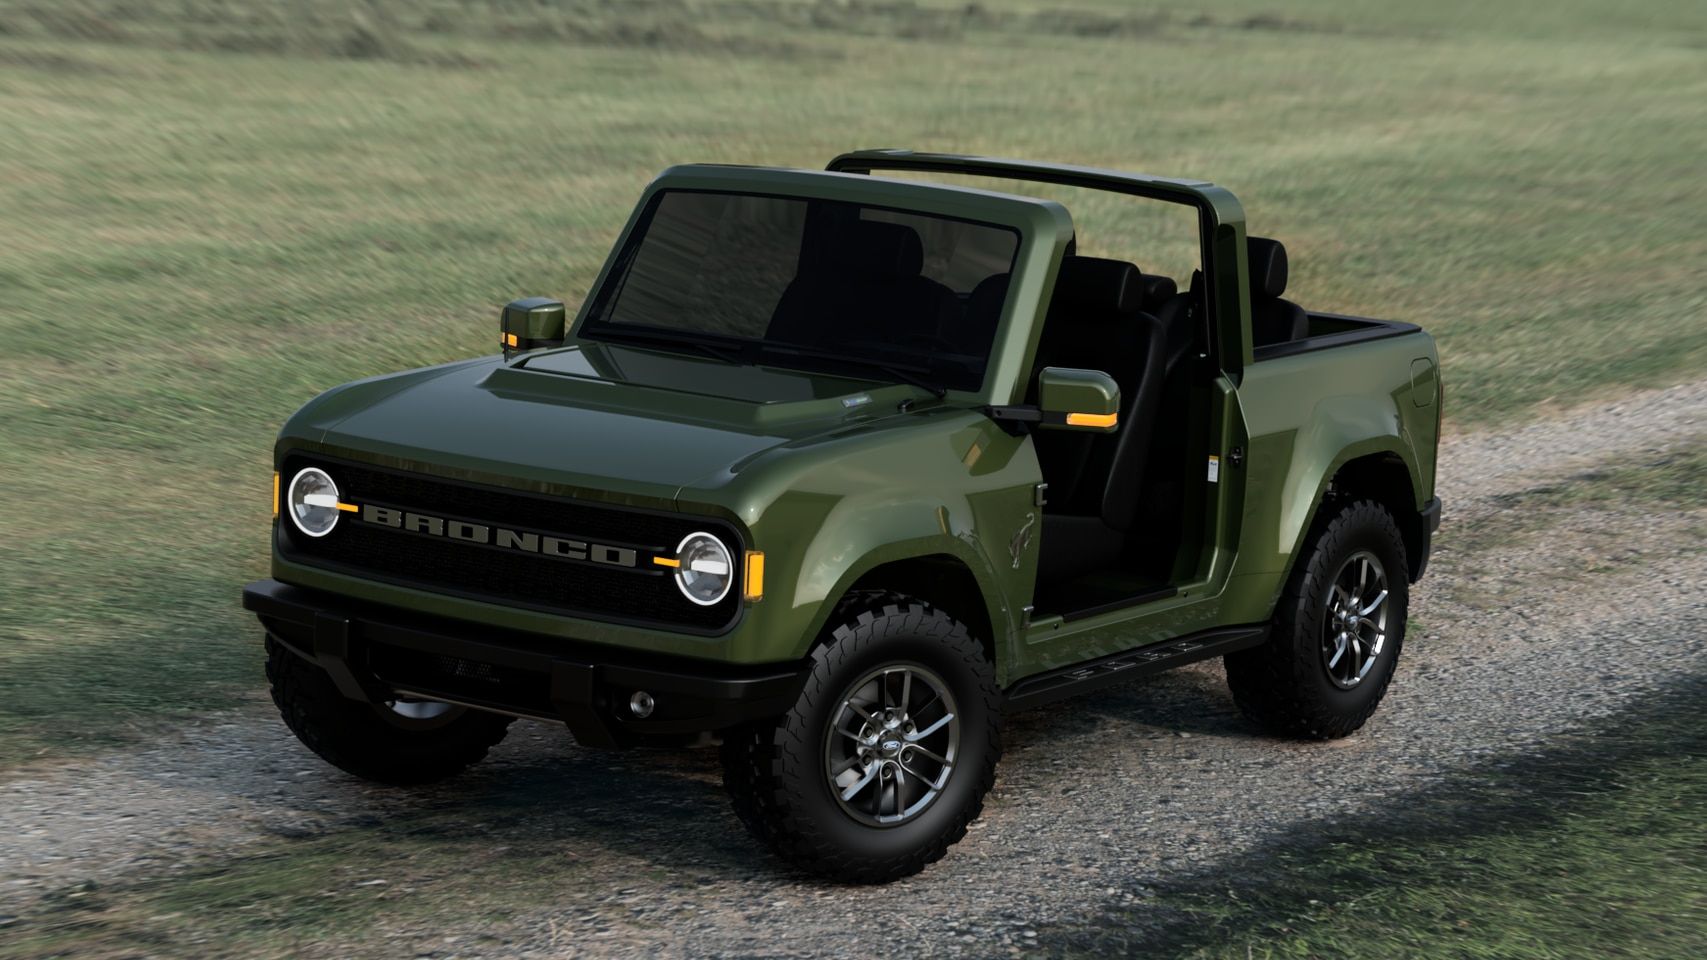 Ford Bronco Imagined in Doorless, Roofless Jeep Wrangler Mode